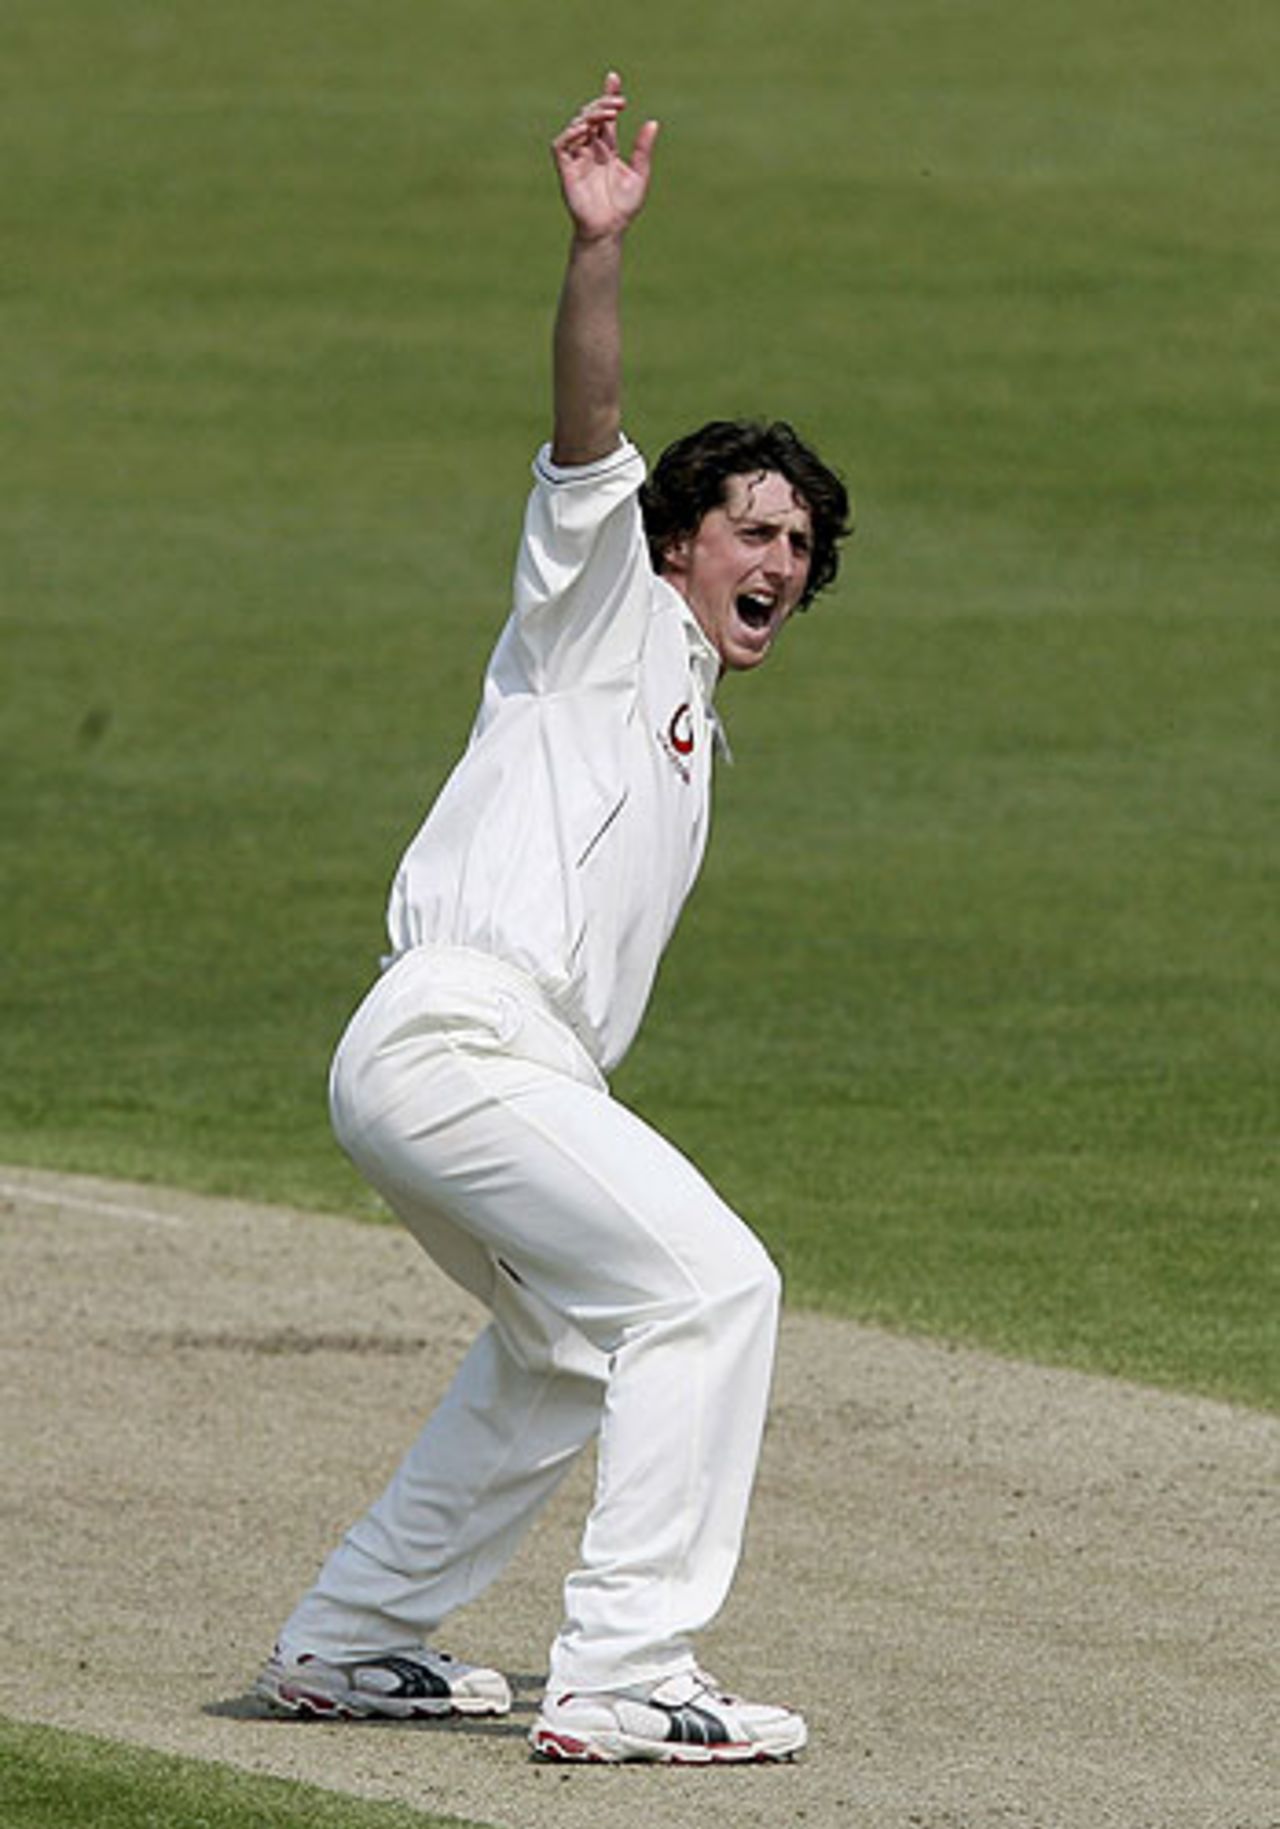 Jon Lewis appeals for a wicket, as England A take on the Sri Lankans, Worcester, May 4, 2006